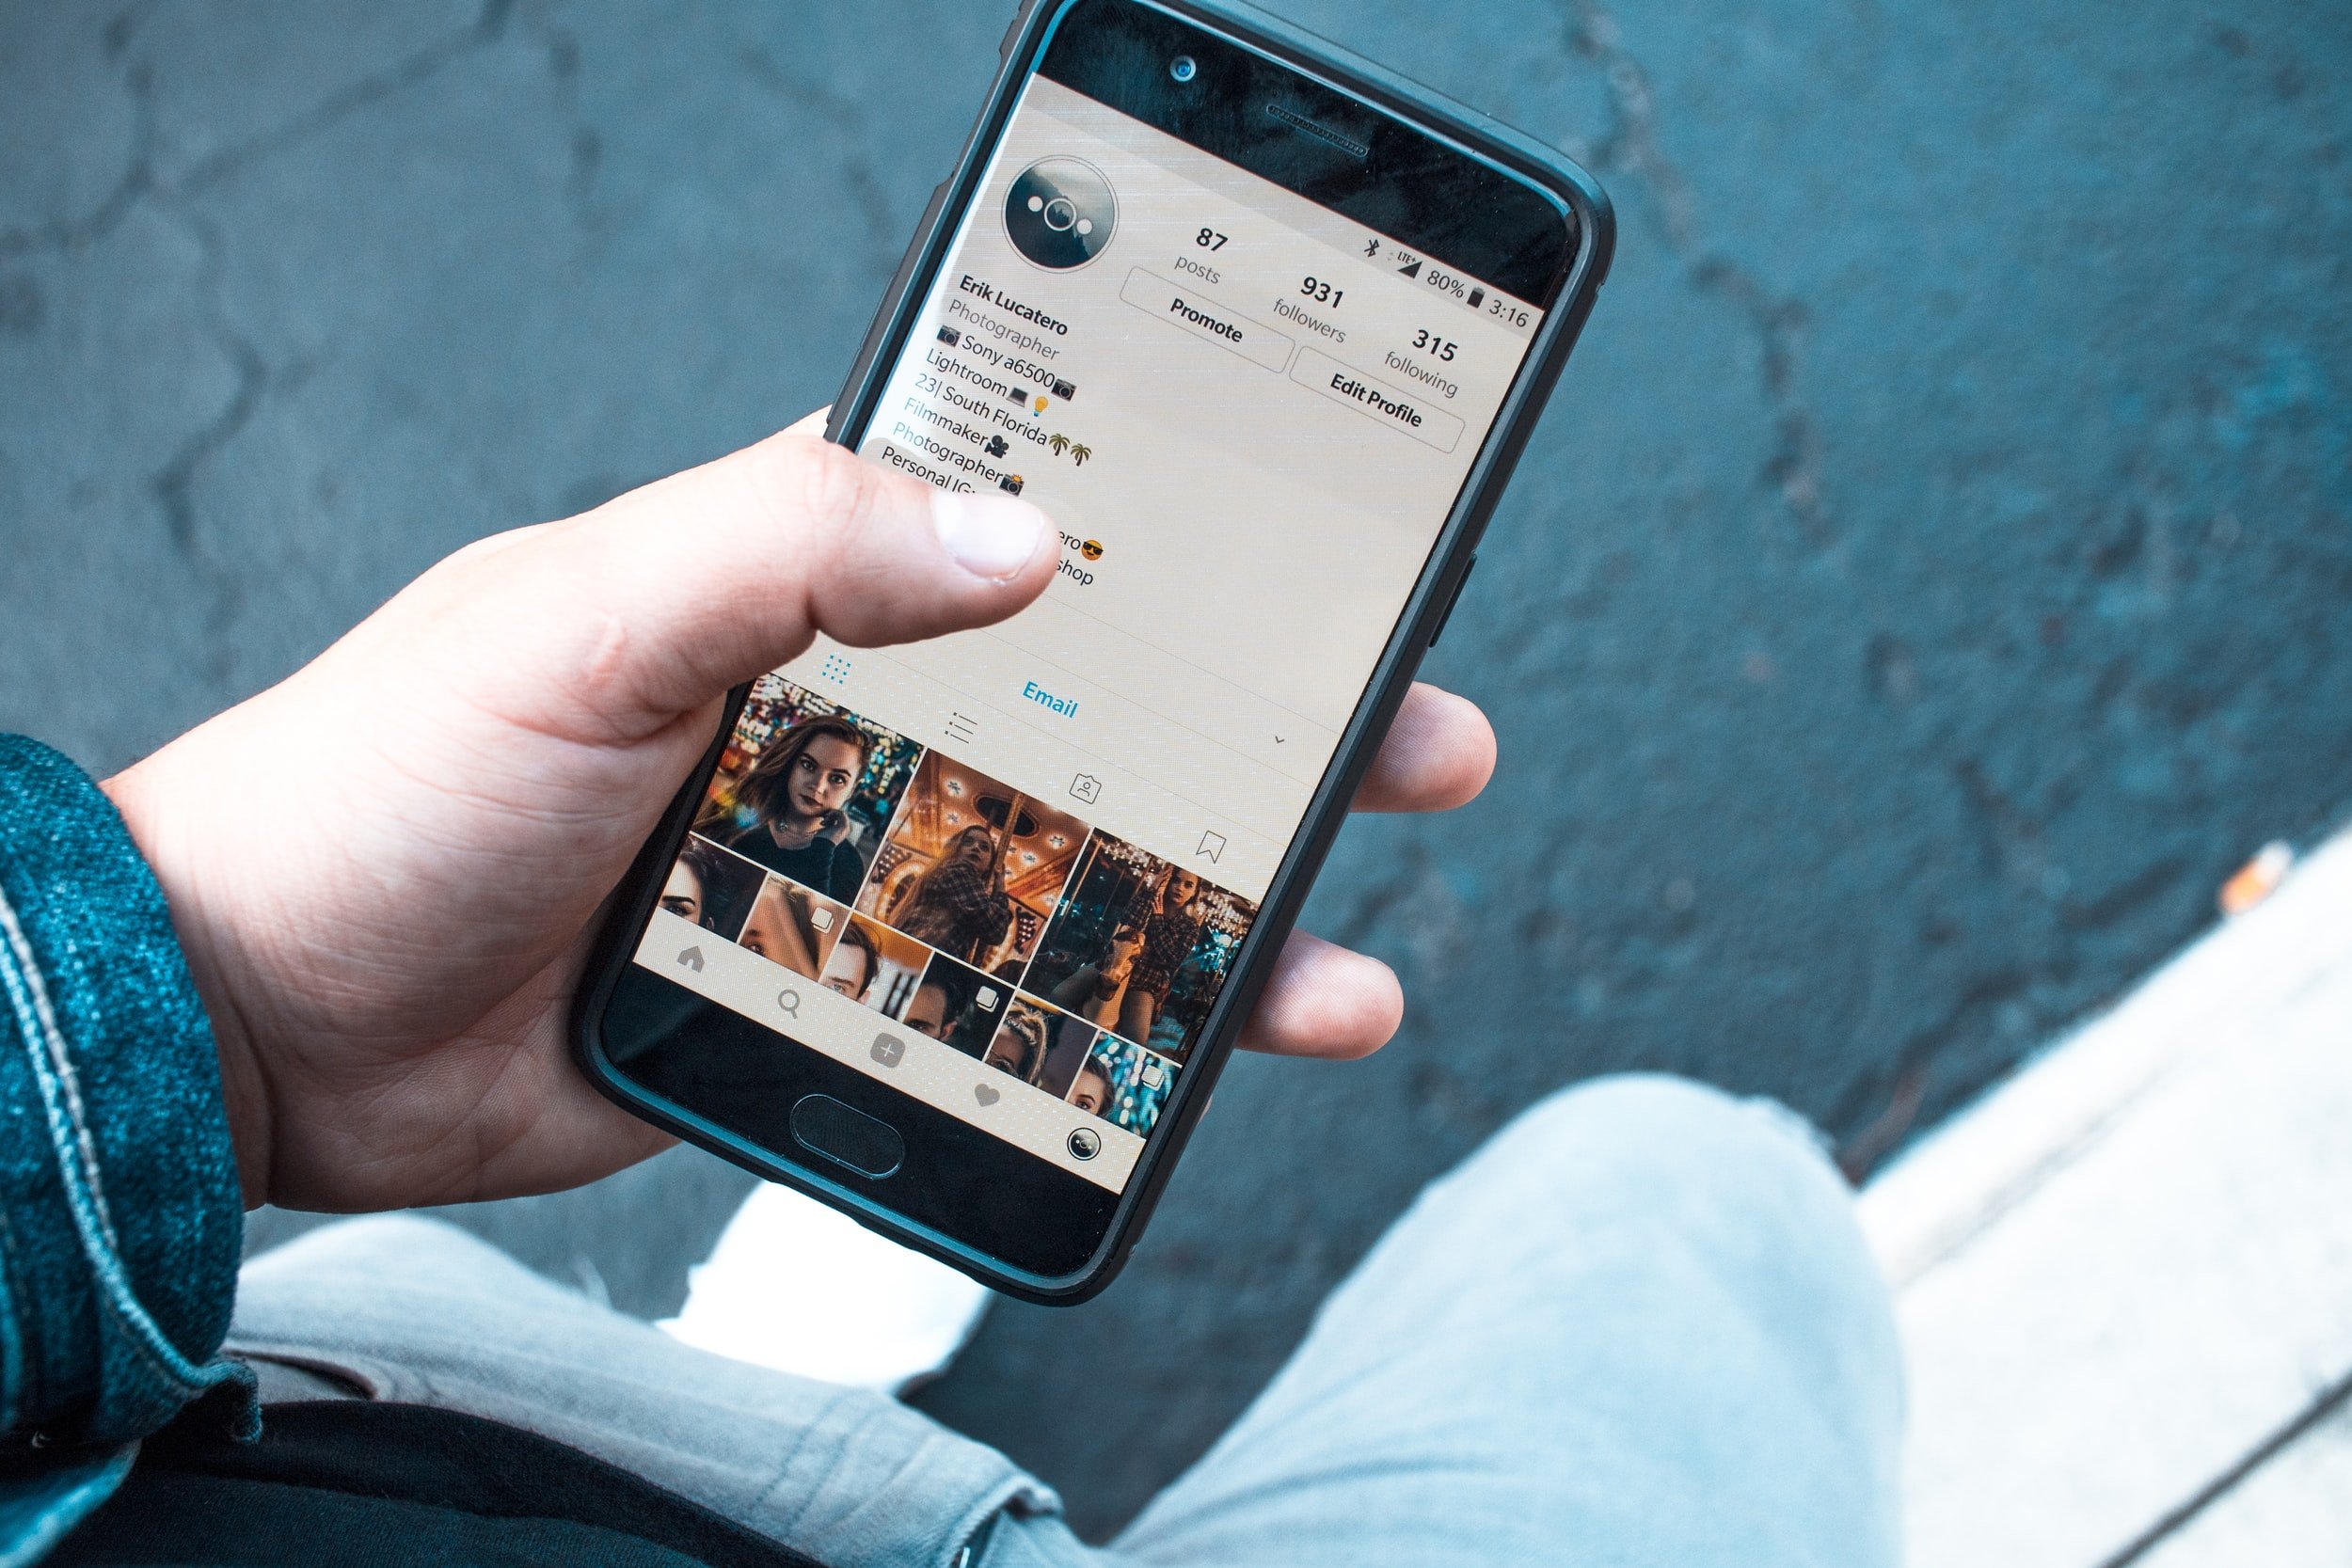 TIPS FOR ORGANIZING YOUR INSTAGRAM LIKES